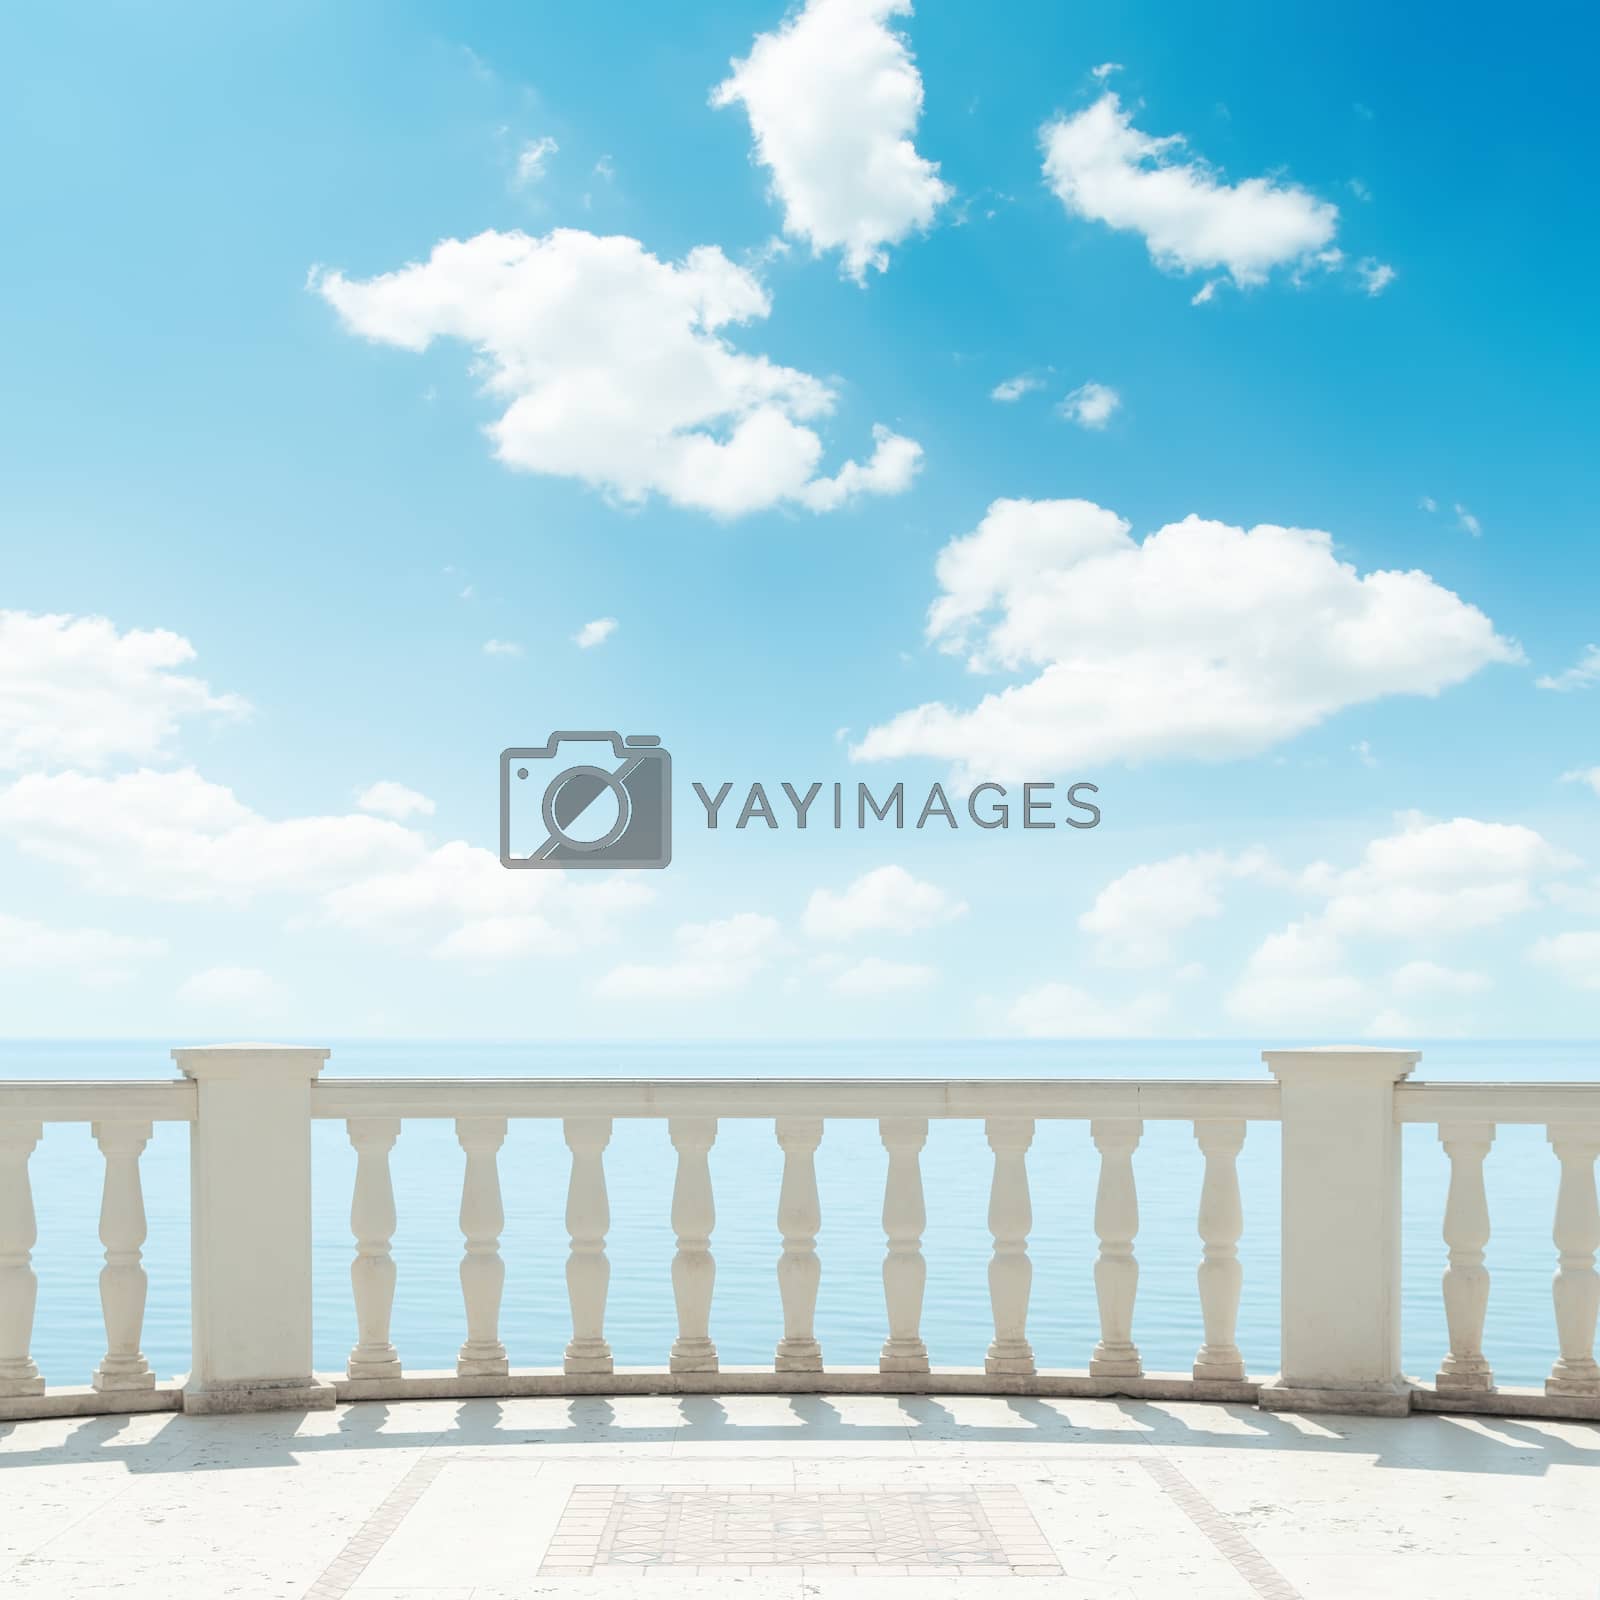 Royalty free image of clouds in blue sky over balcony by mycola